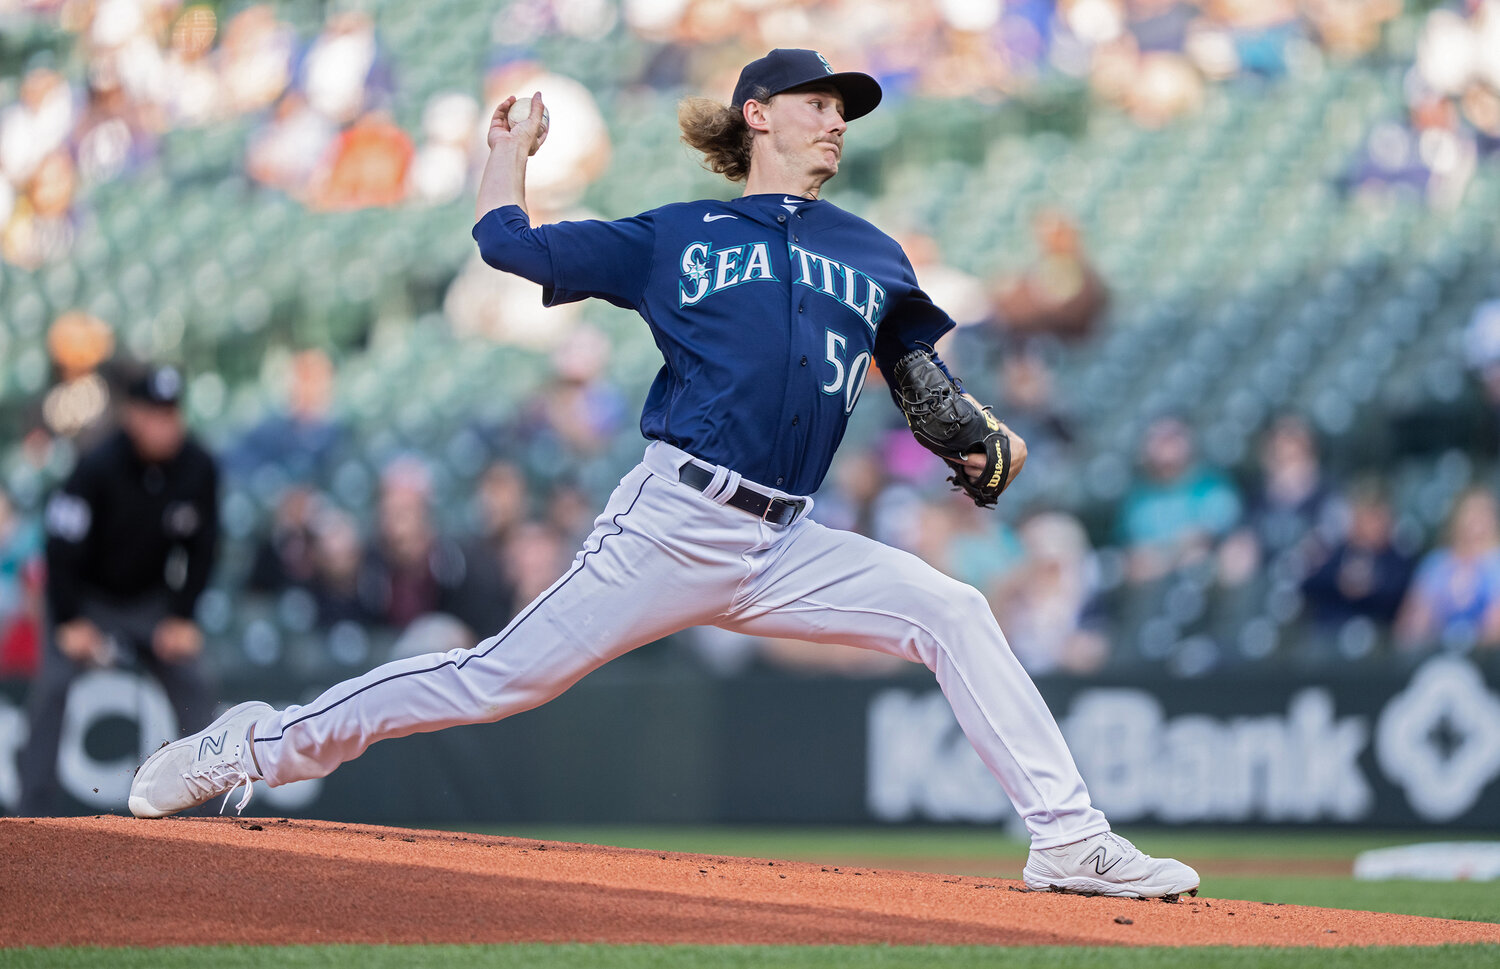 Bryce Miller of the Seattle Mariners pitches during the first inning against the Oakland Athletics at T-Mobile Park on Wednesday, May 24, 2023, in Seattle. (Stephen Brashear/Getty Images/TNS)